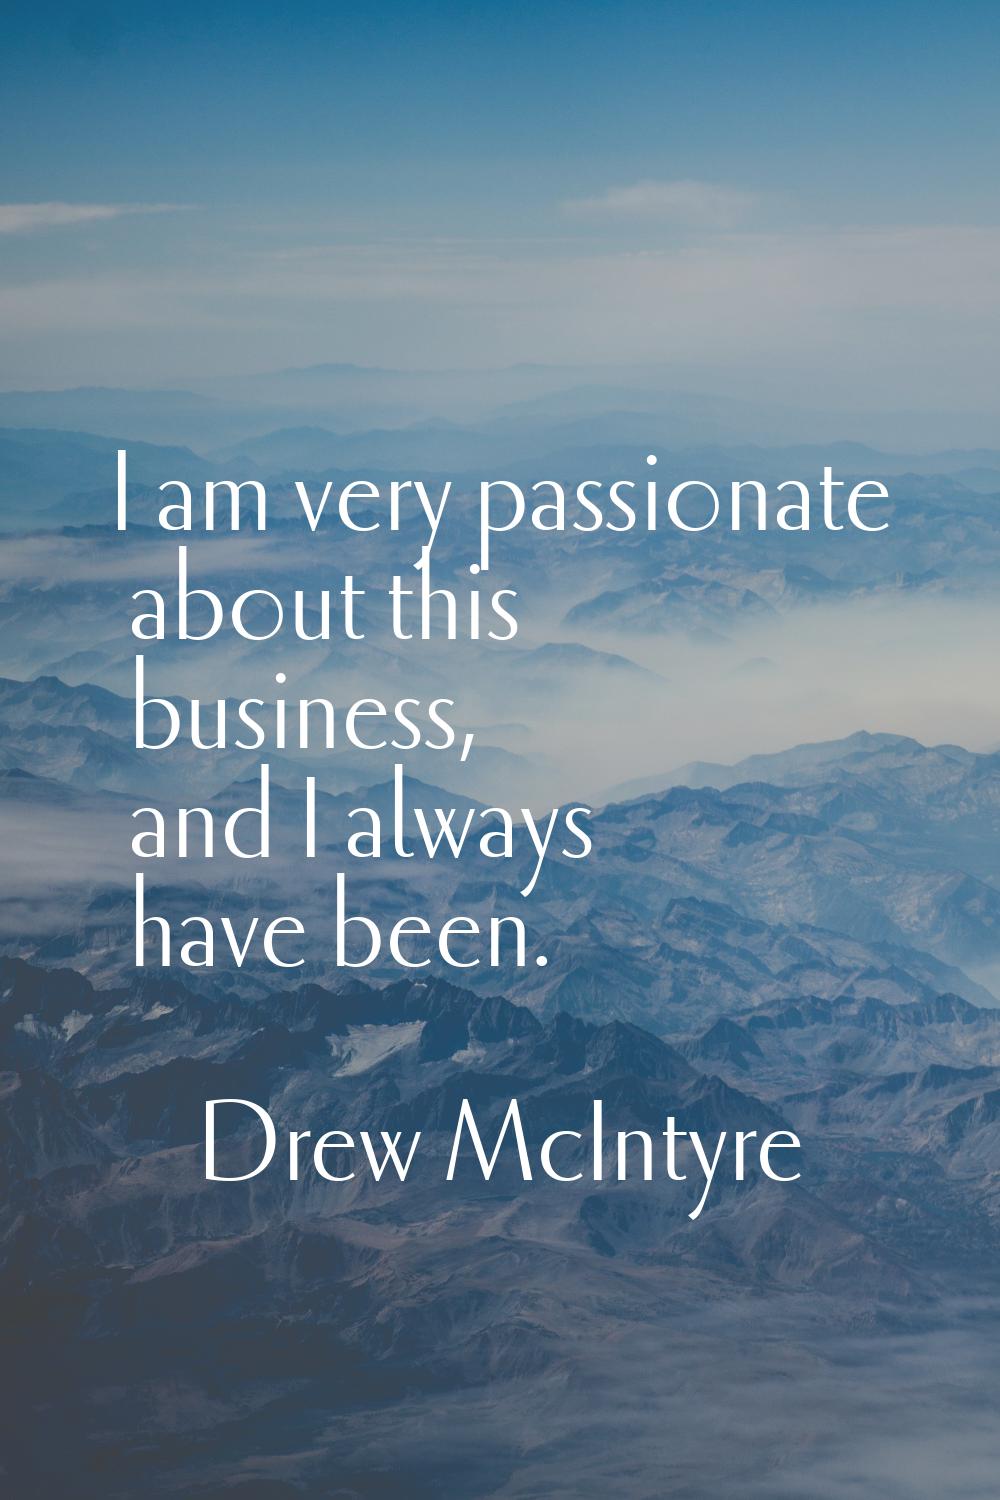 I am very passionate about this business, and I always have been.